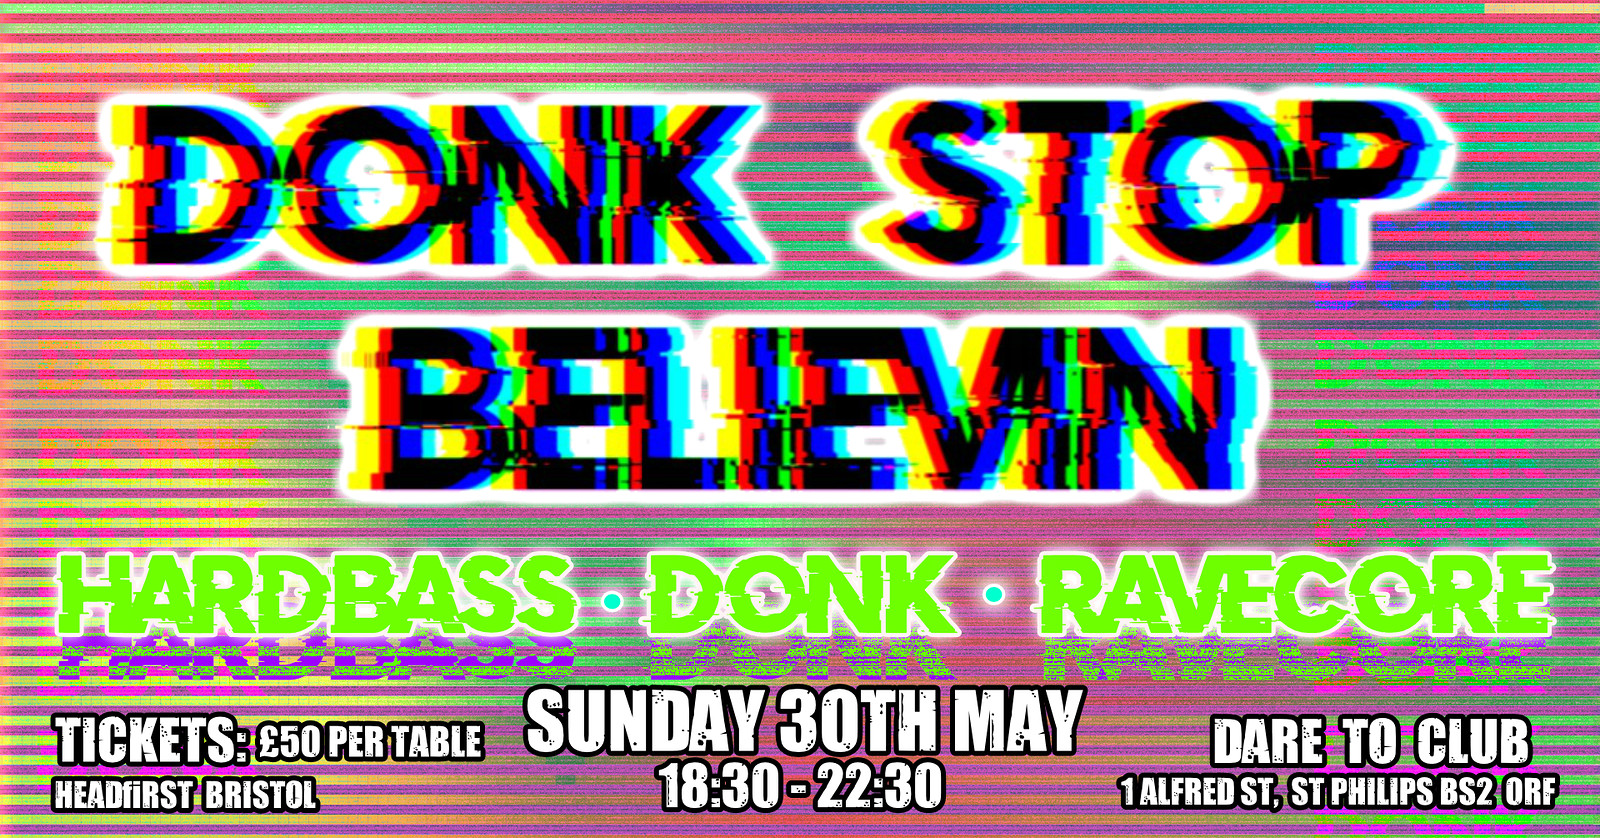 Donk Stop Believin - Sittin donks 18:30 - 22:30 at Dare to Club